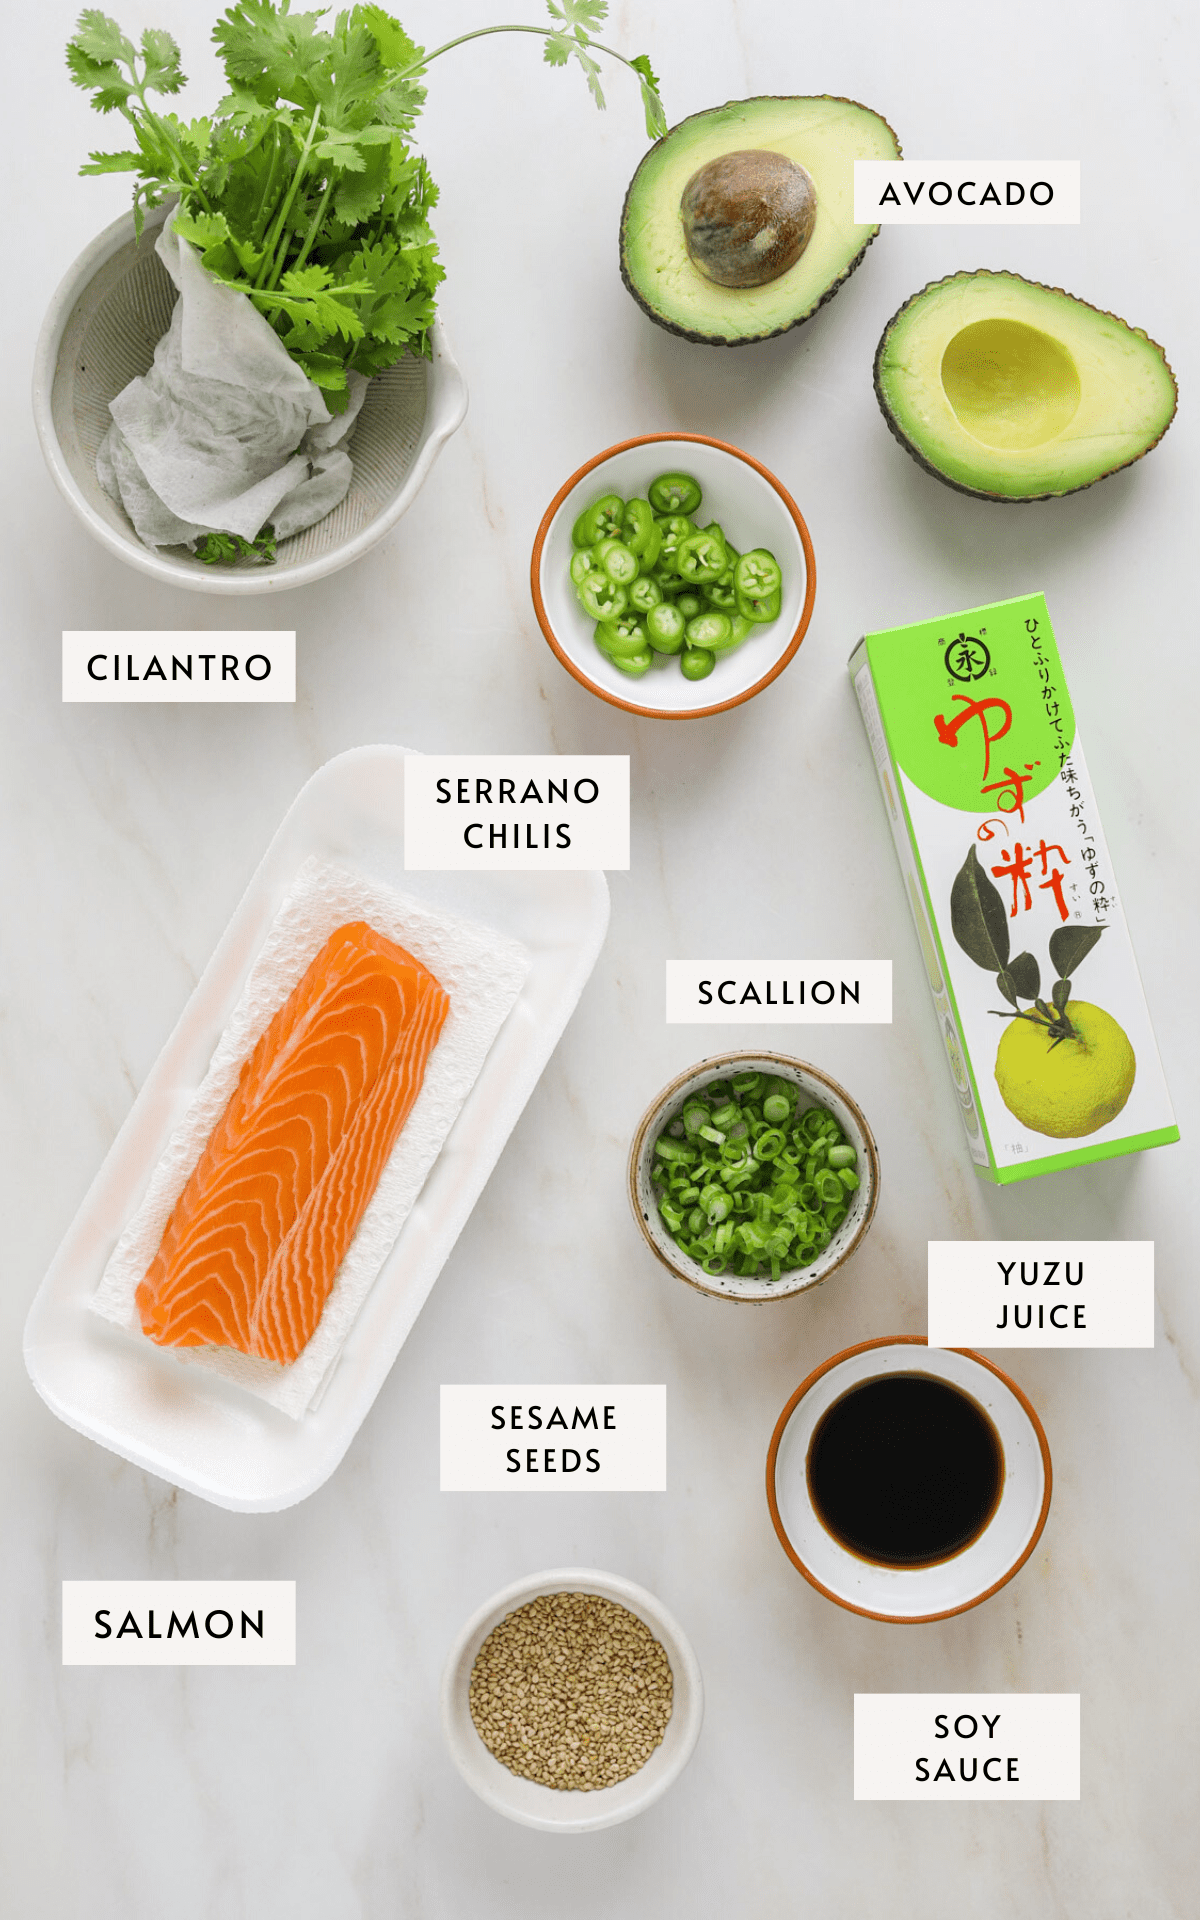 a small filet of raw salmon, a bundle of cilantro, a small dish of sliced Serrano chilis, avocado and a bottle of yuzu juice.